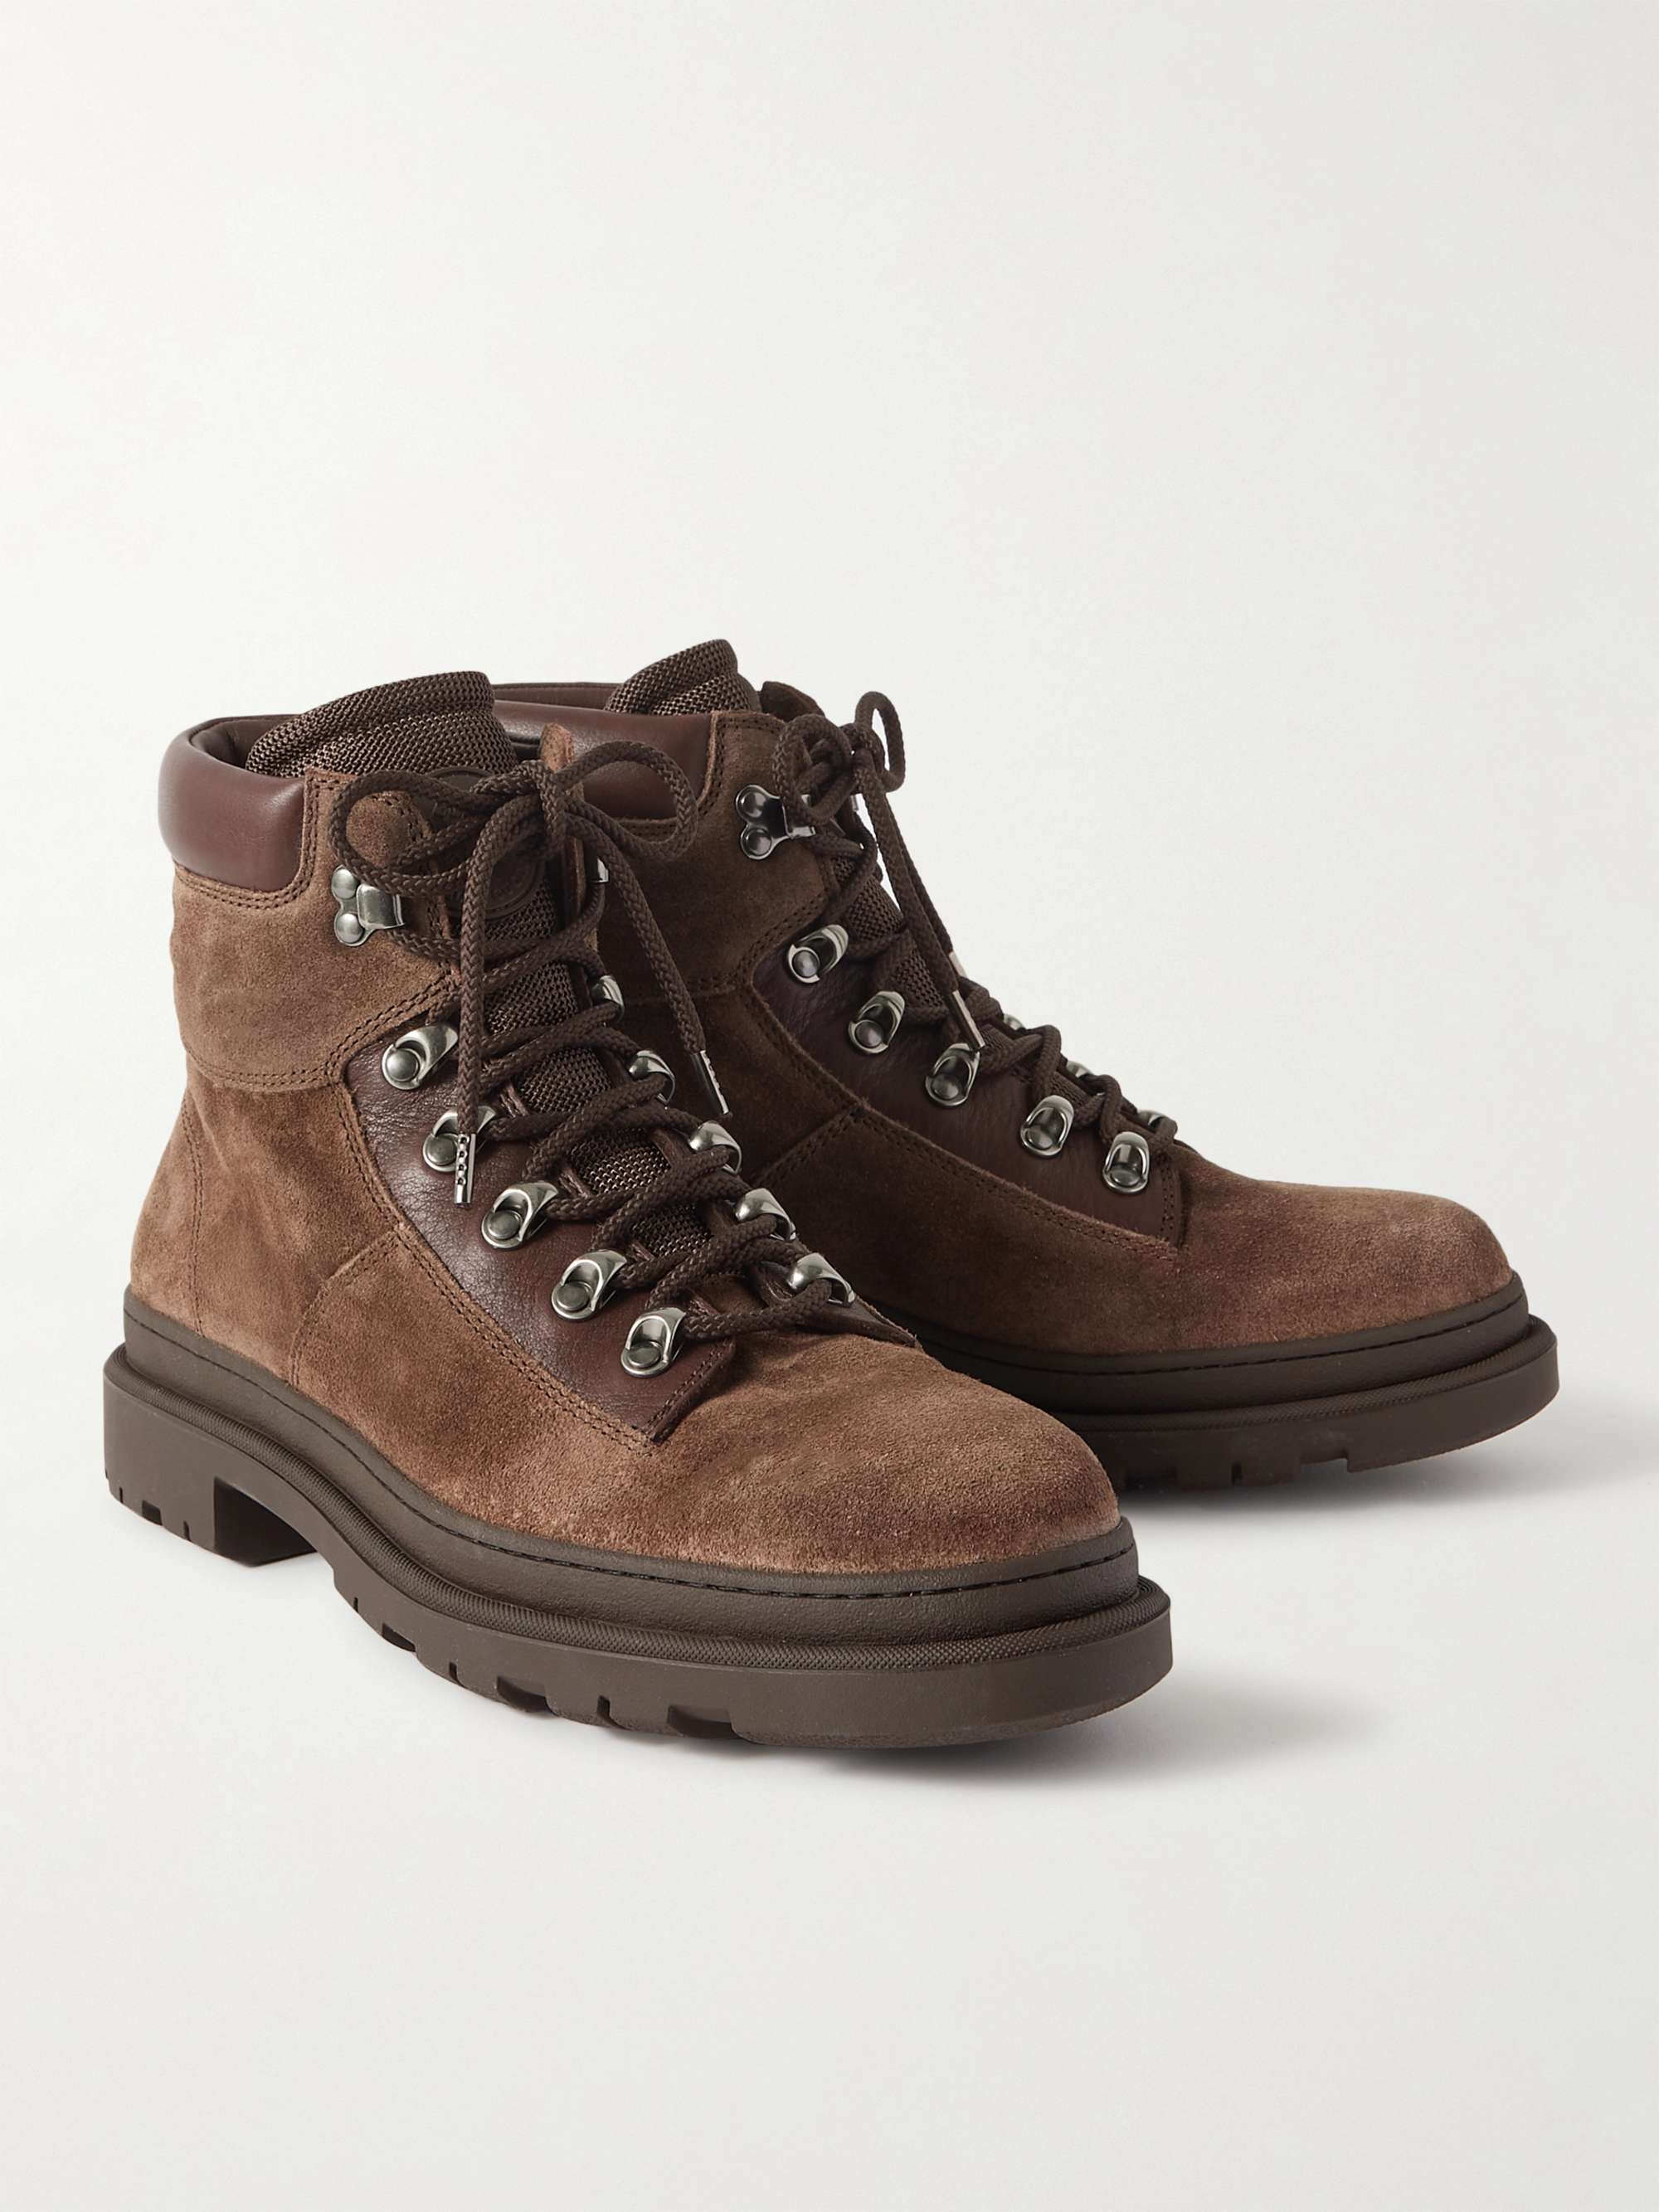 BRUNELLO CUCINELLI Leather-Trimmed Suede Boots